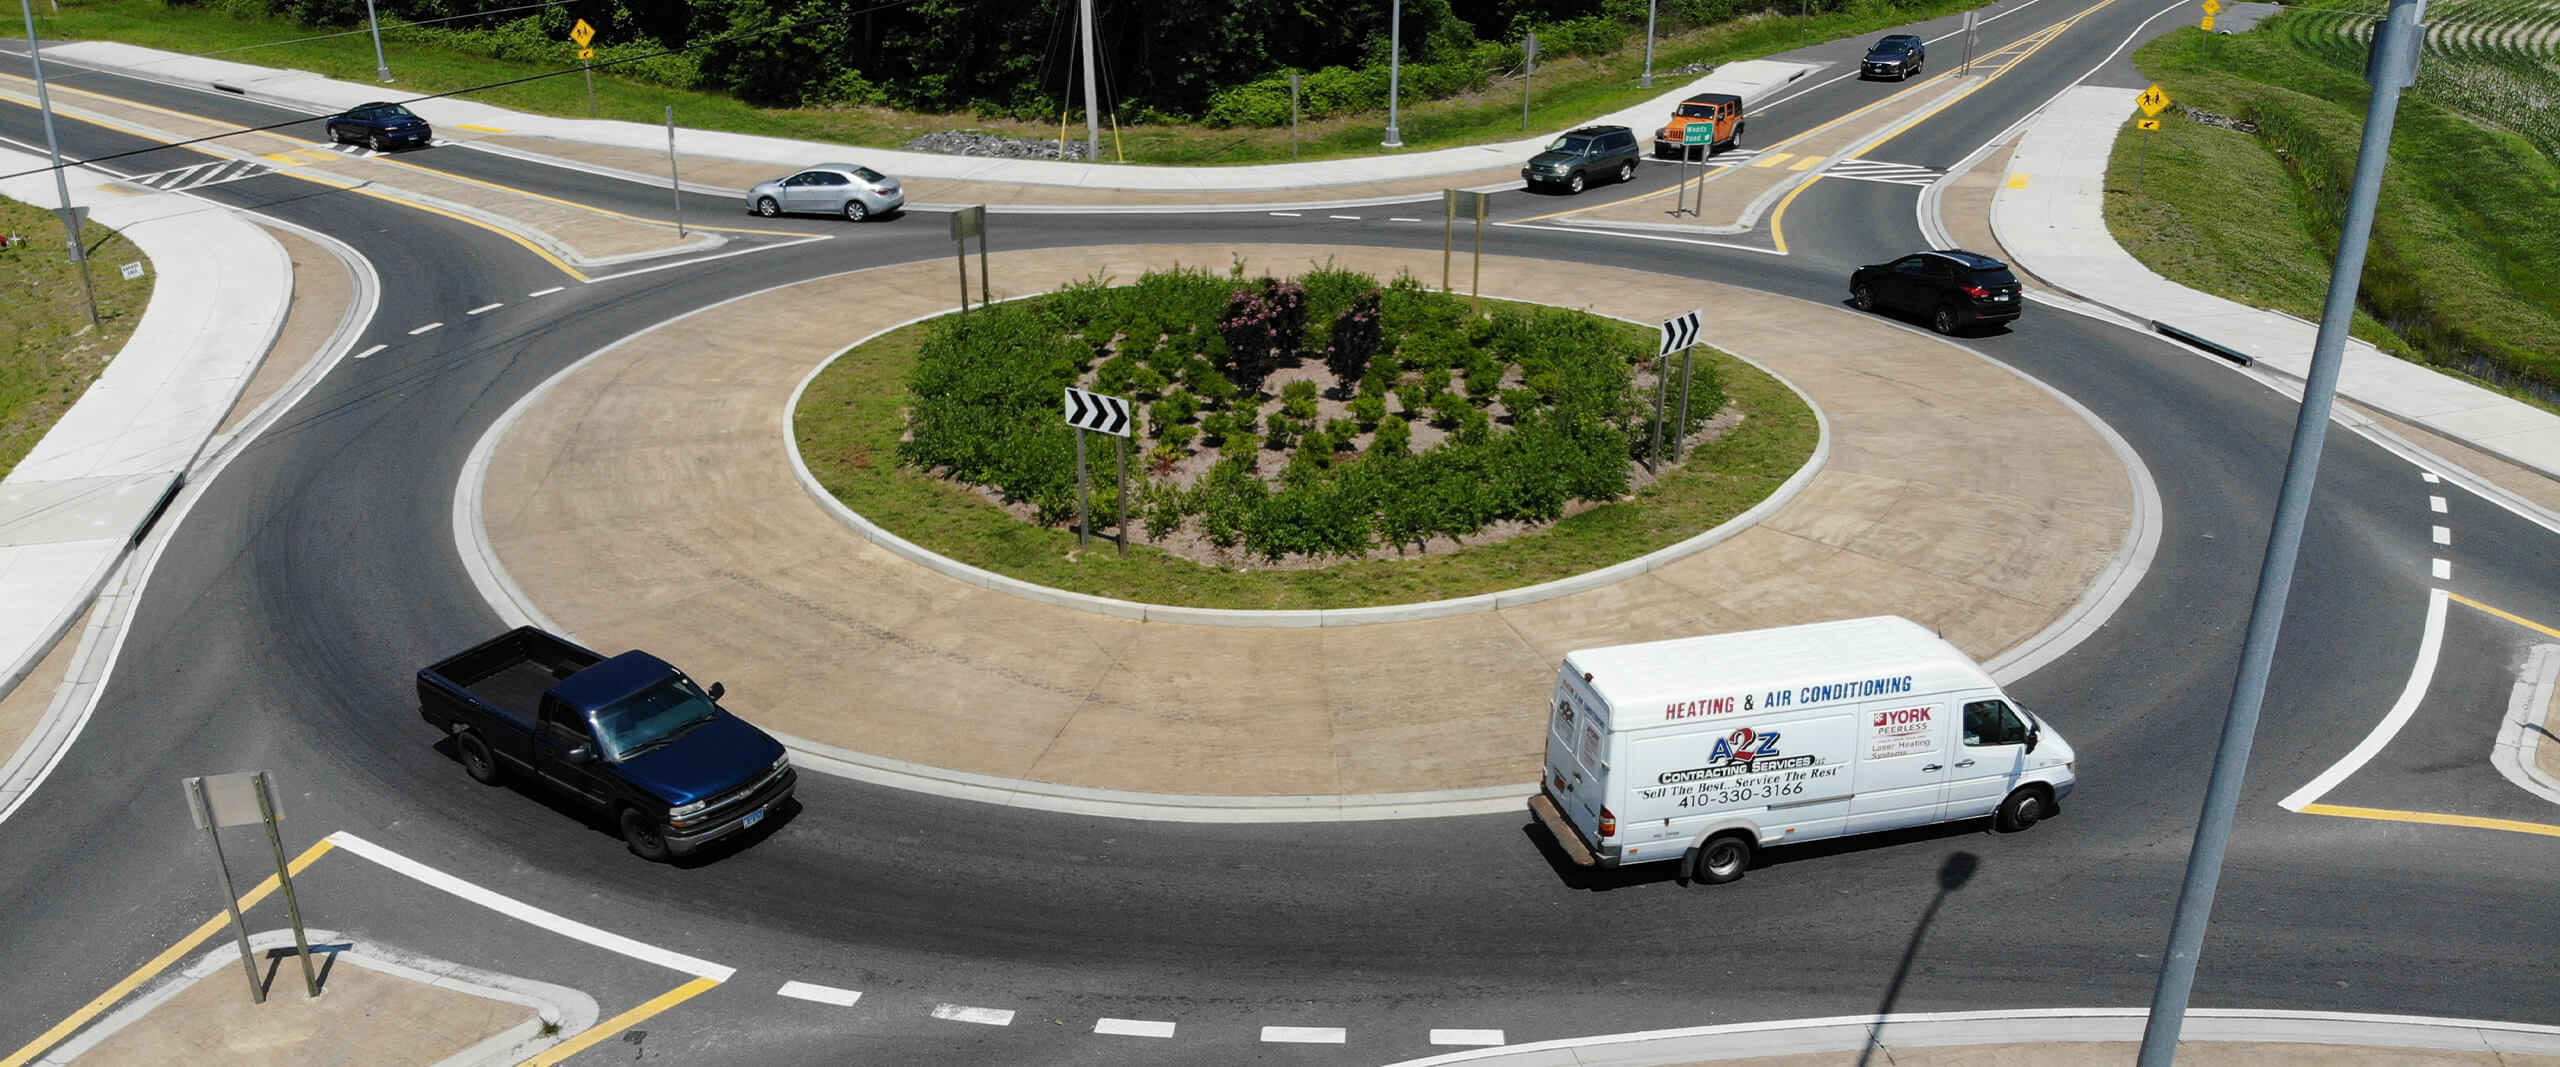 The roundabout on MD 16 at Woods Road